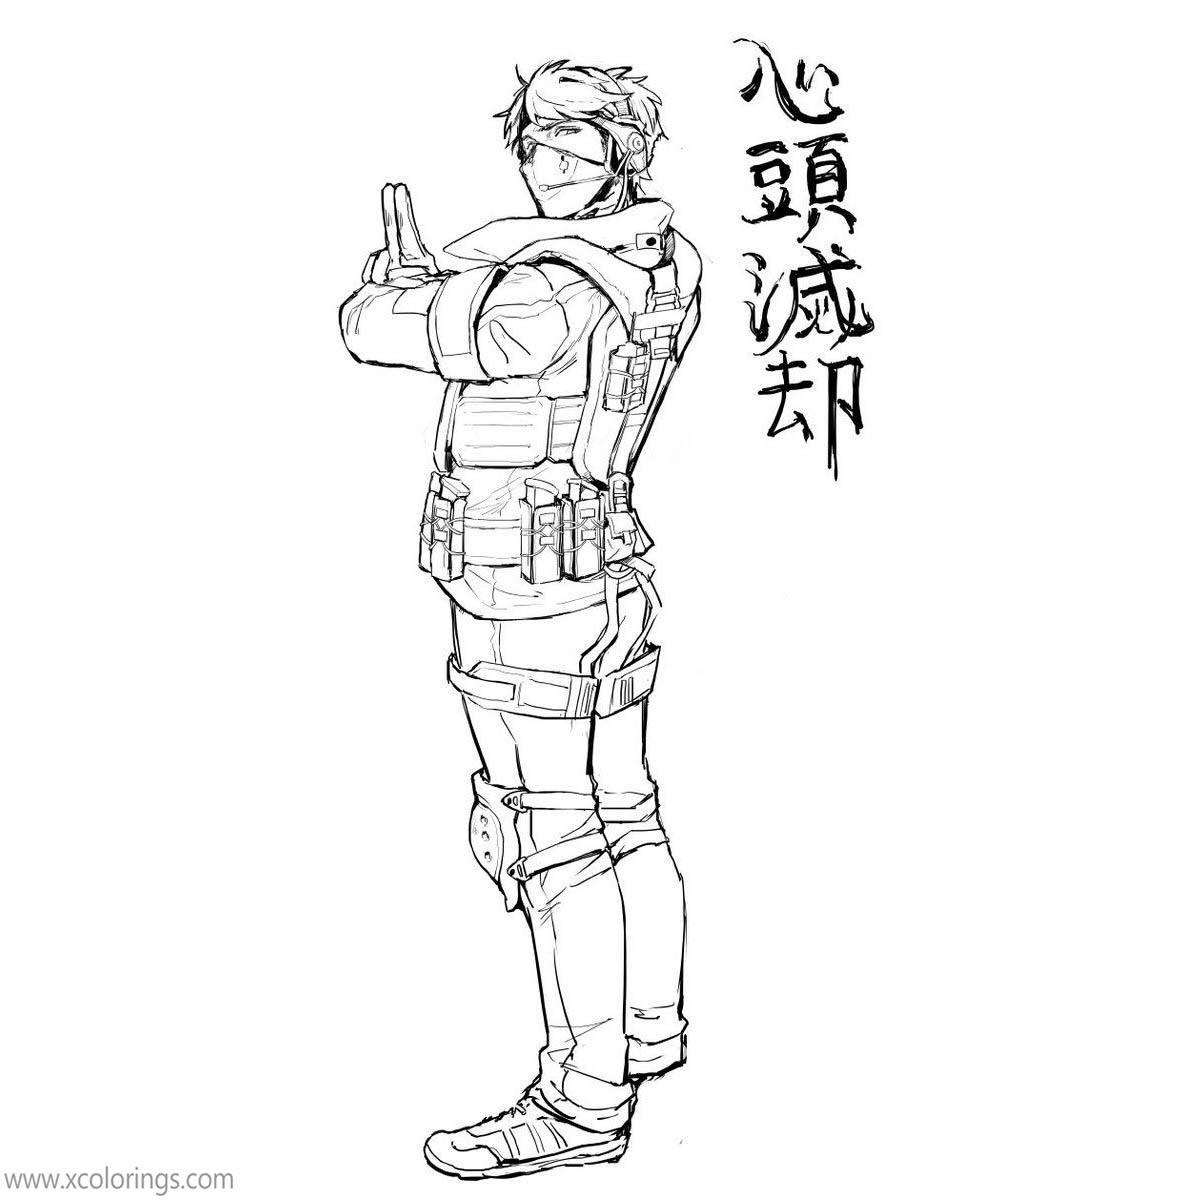 Free Rainbow Six Siege Coloring Pages by Japanese Fan printable